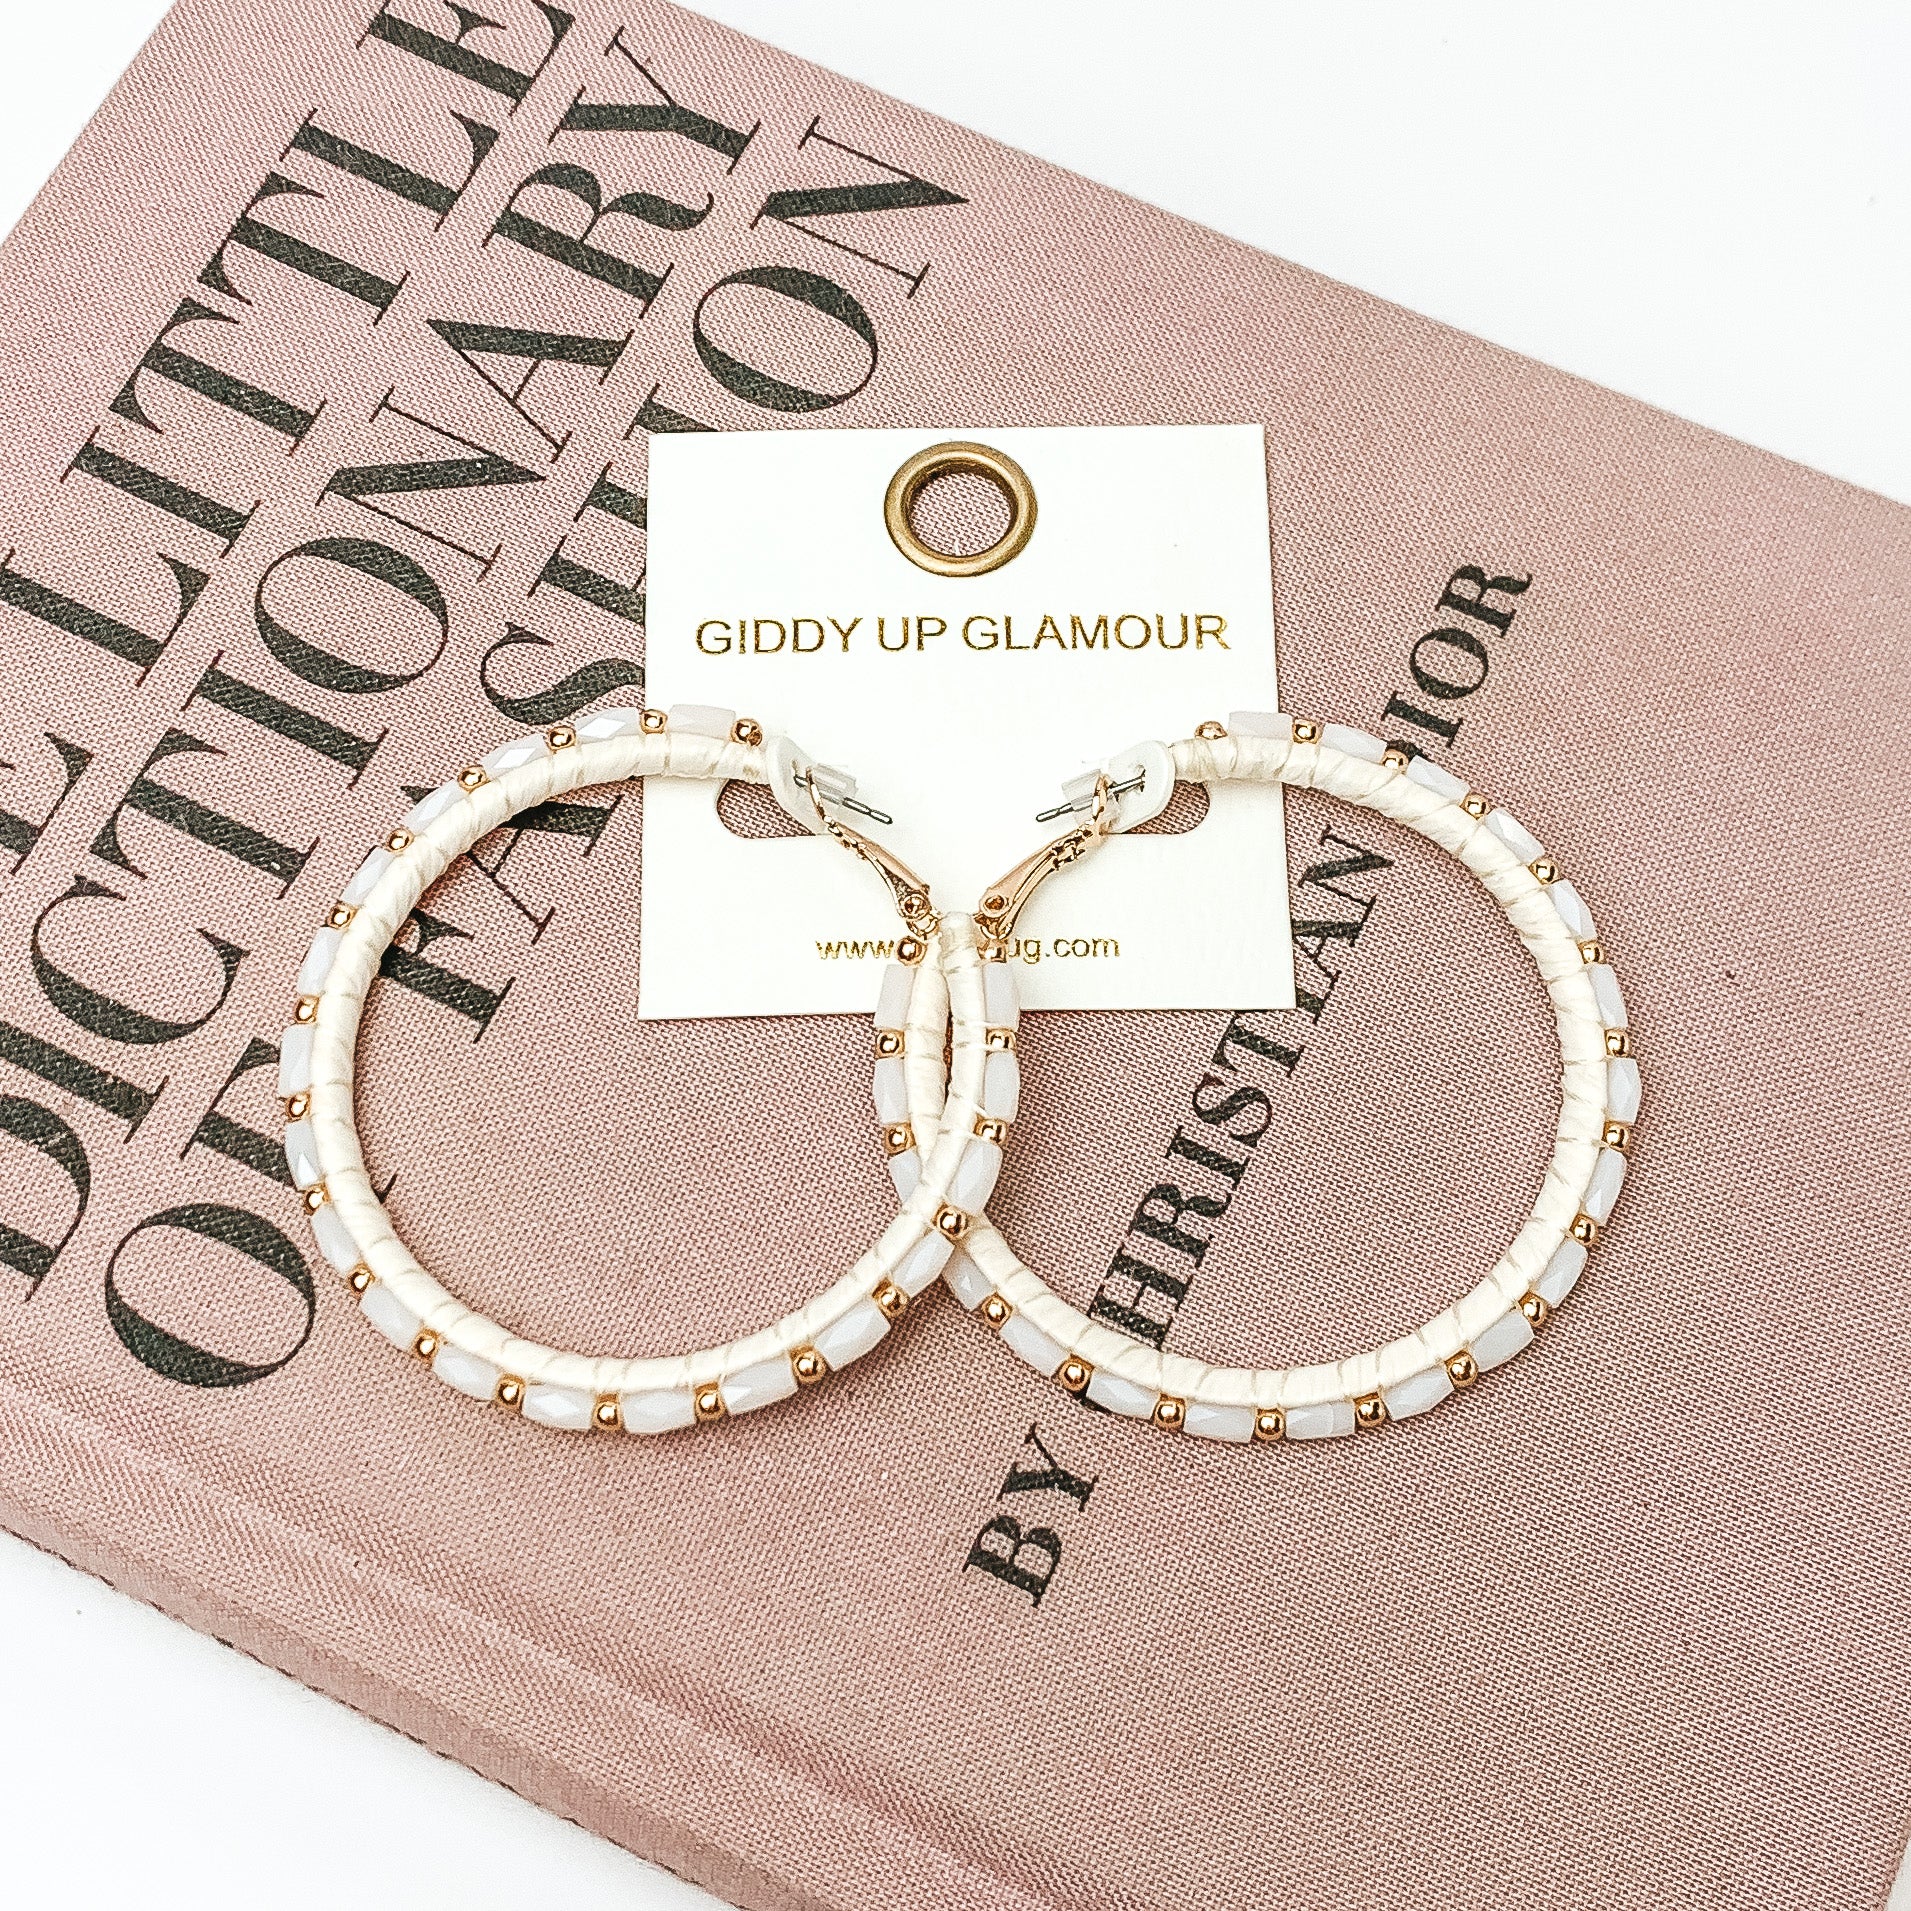 Pictured are circle beaded hoop earrings with gold spacers in ivory. They are pictured with a pink fashion journal on a white background